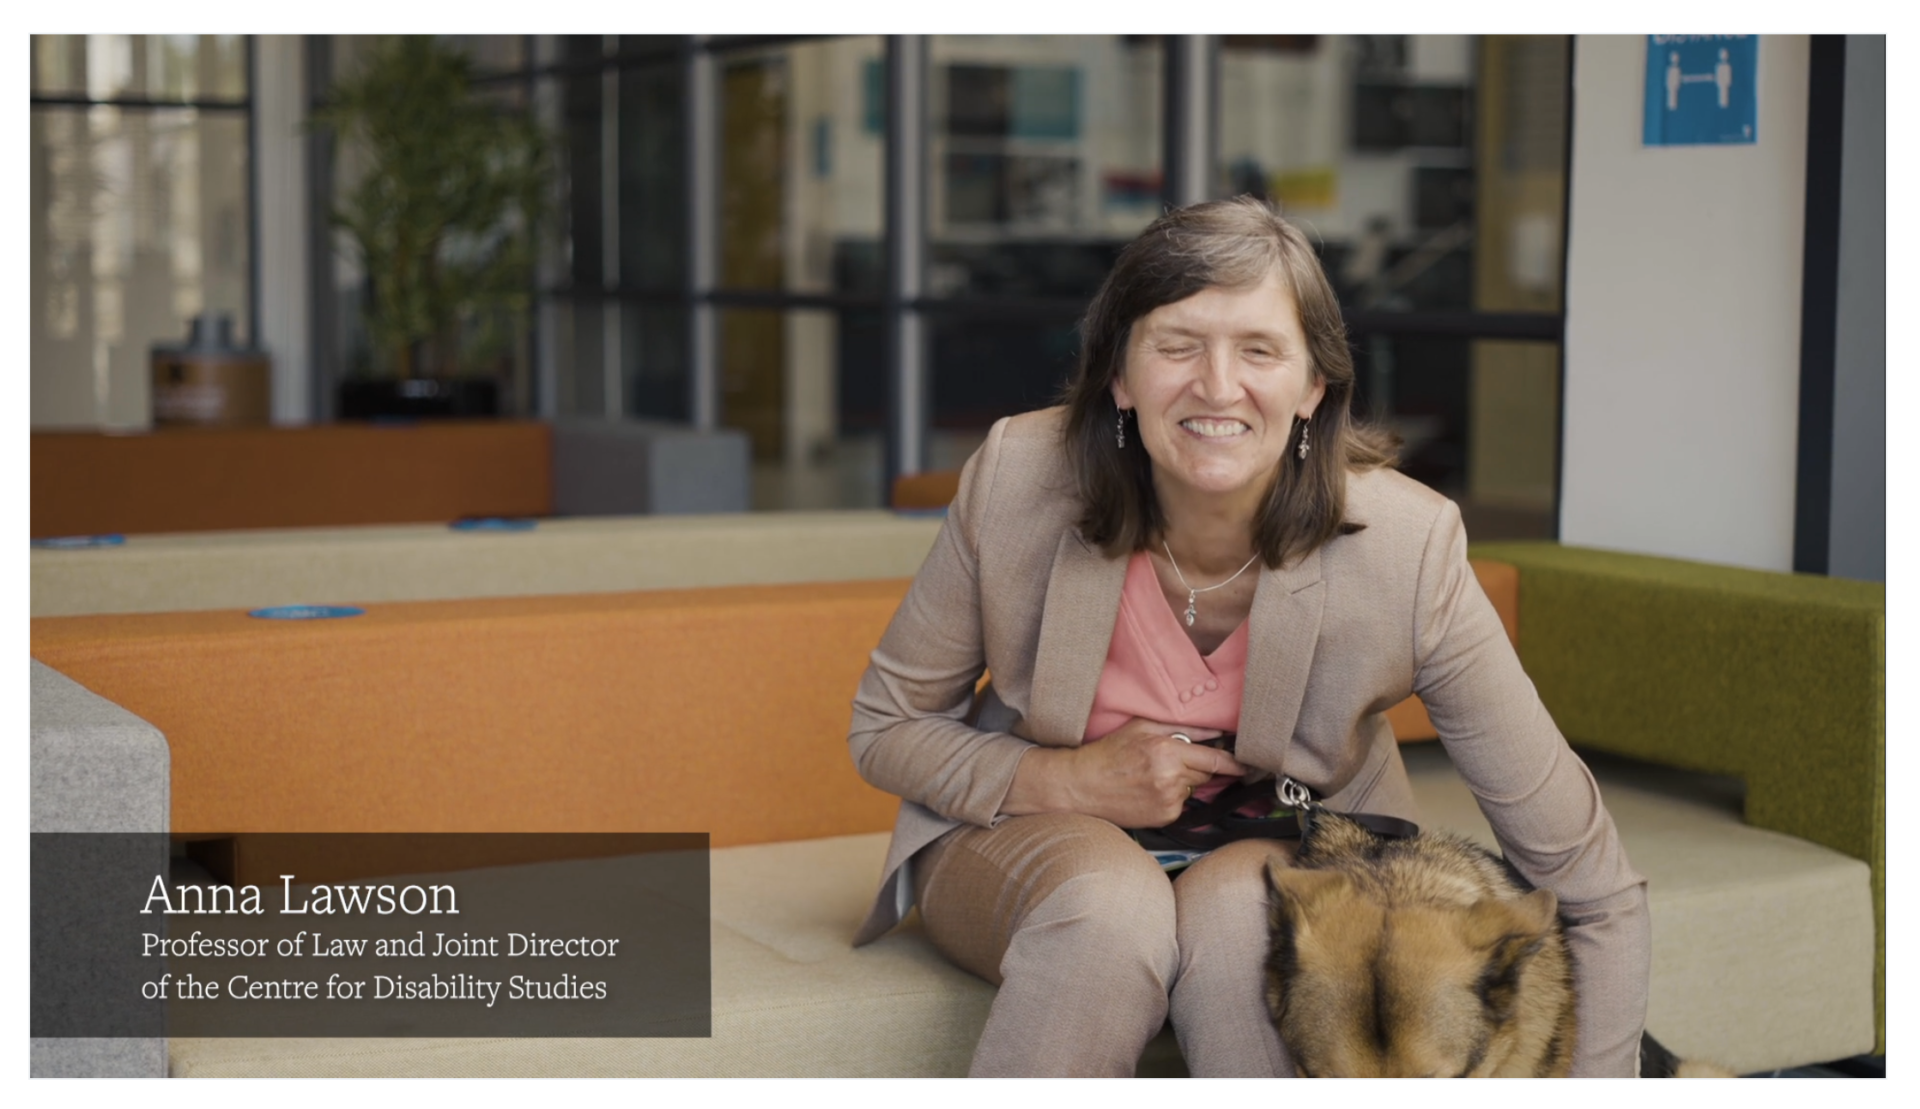 Professor Anna Lawson sitting with her guide dog